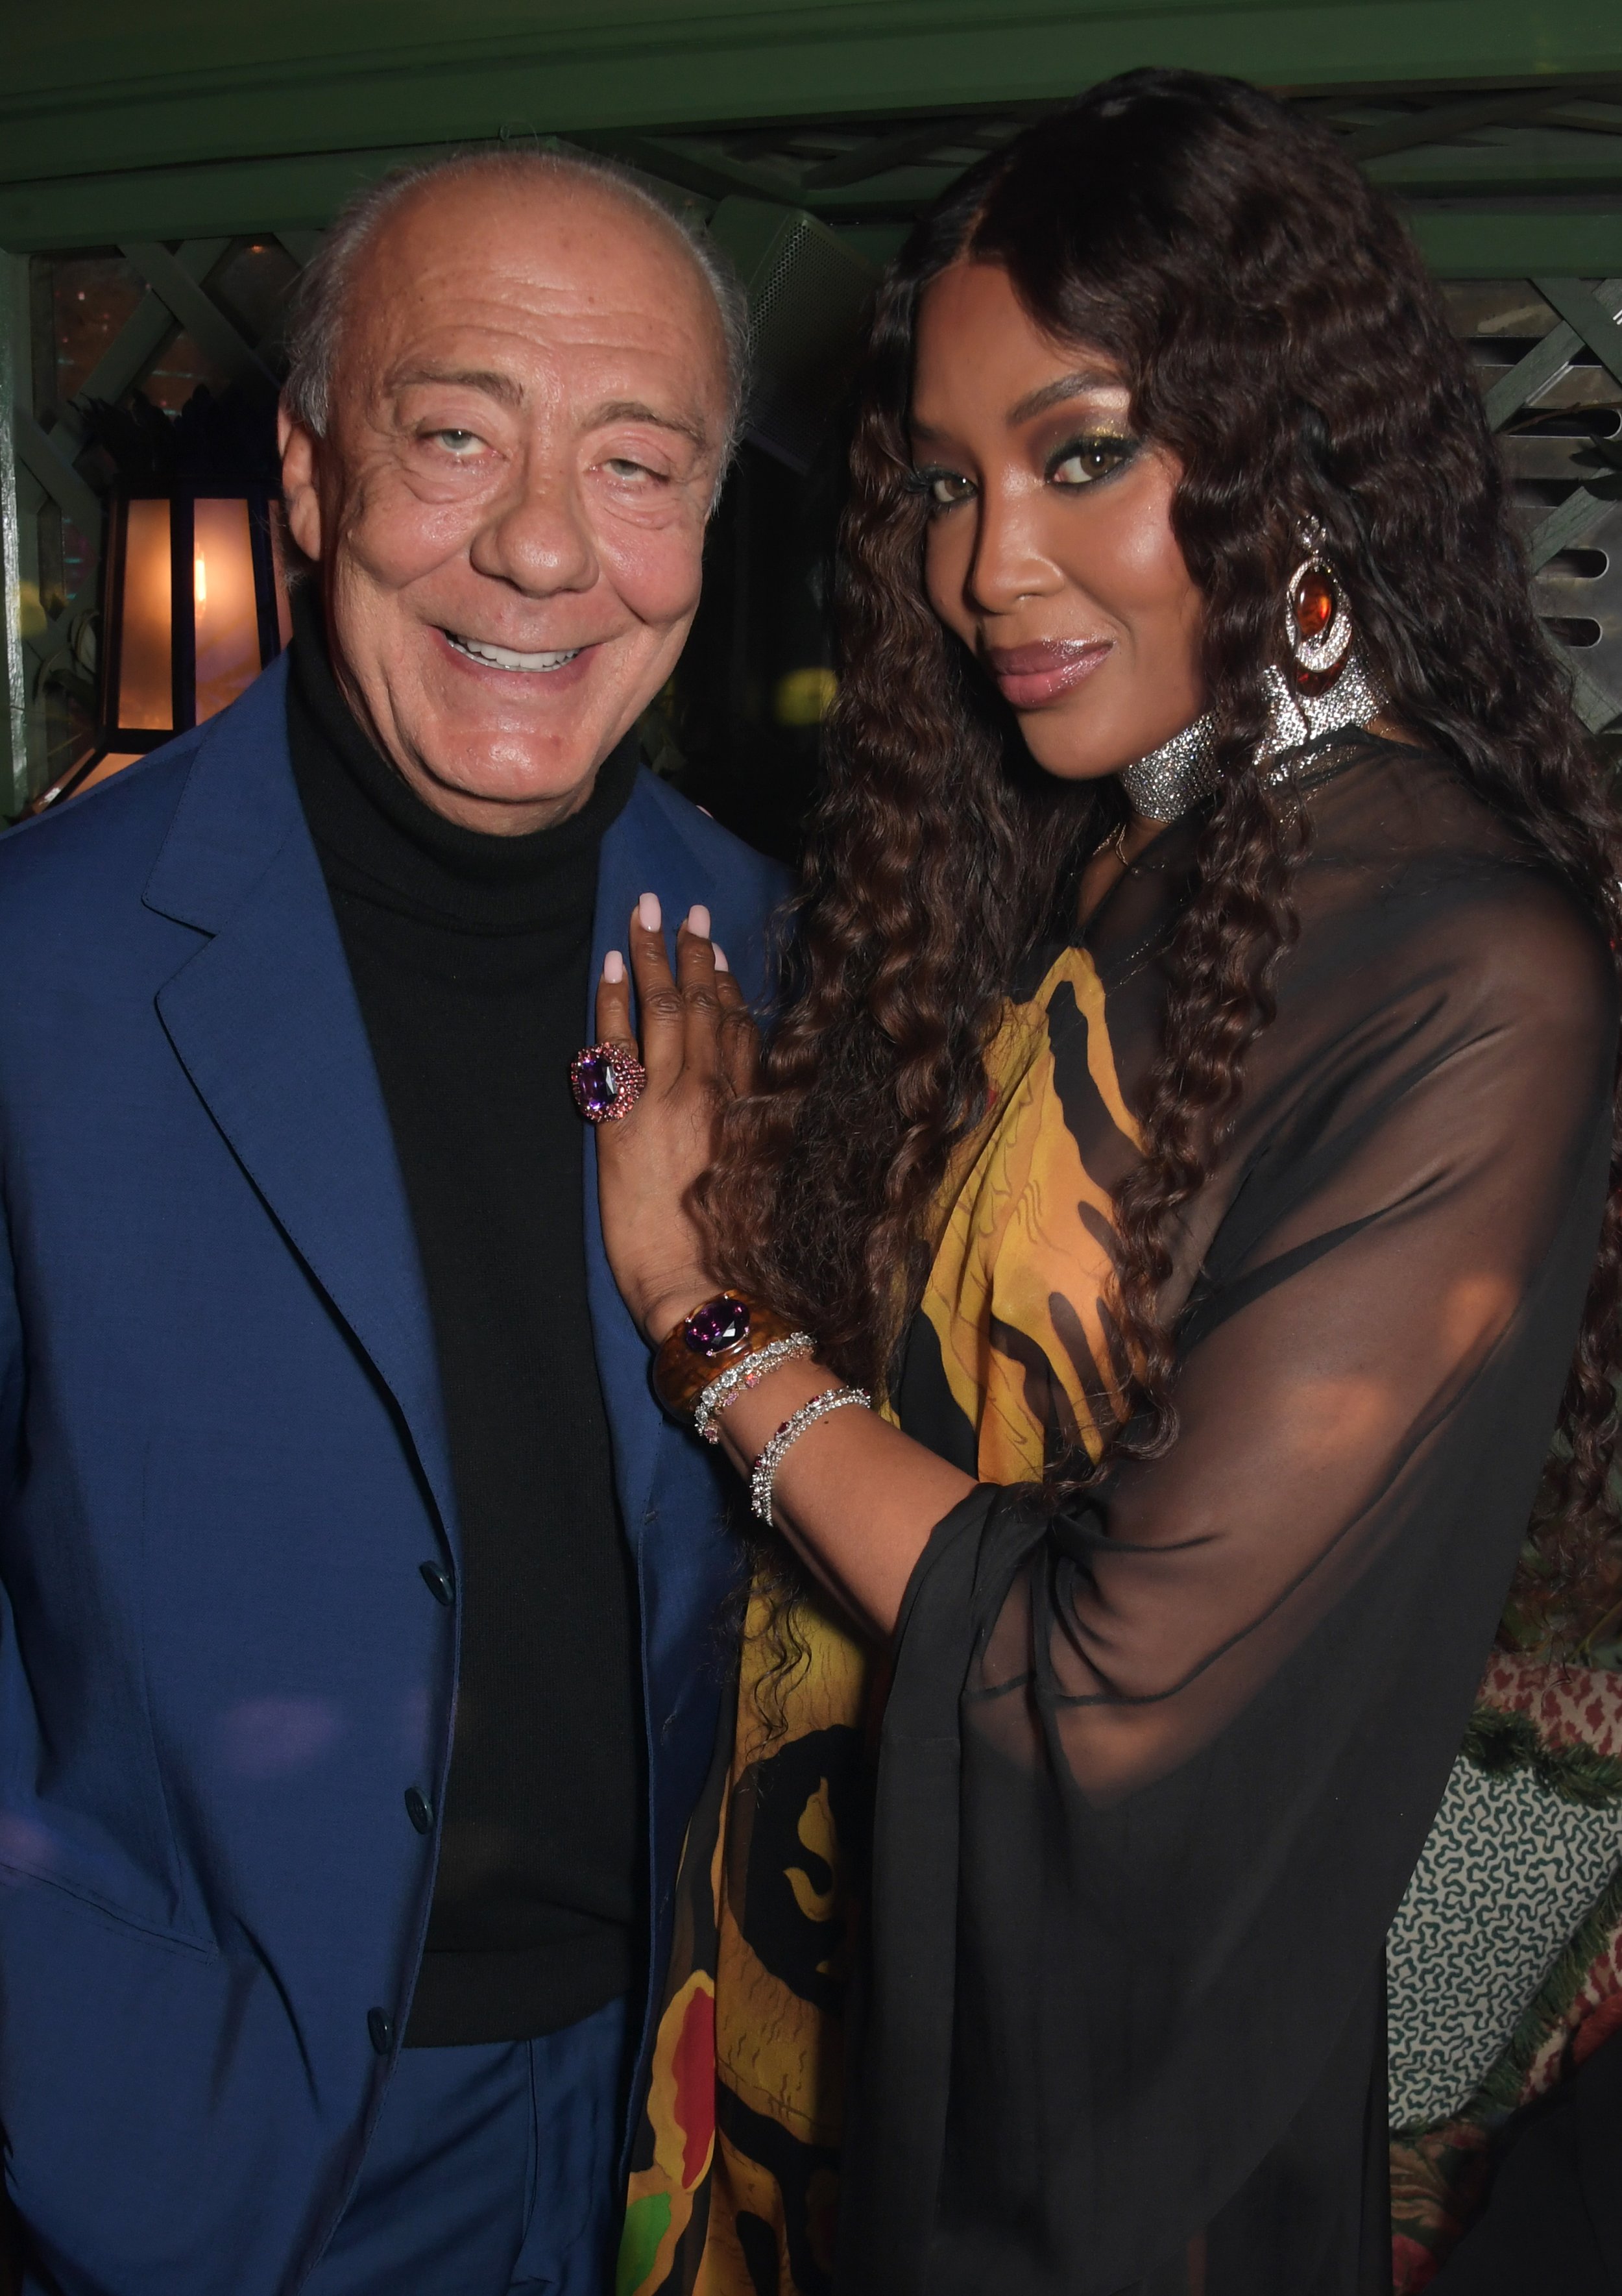 Fawaz Gruosi and Naomi Campbell at Annabels 4th Anniversary Party37.jpg